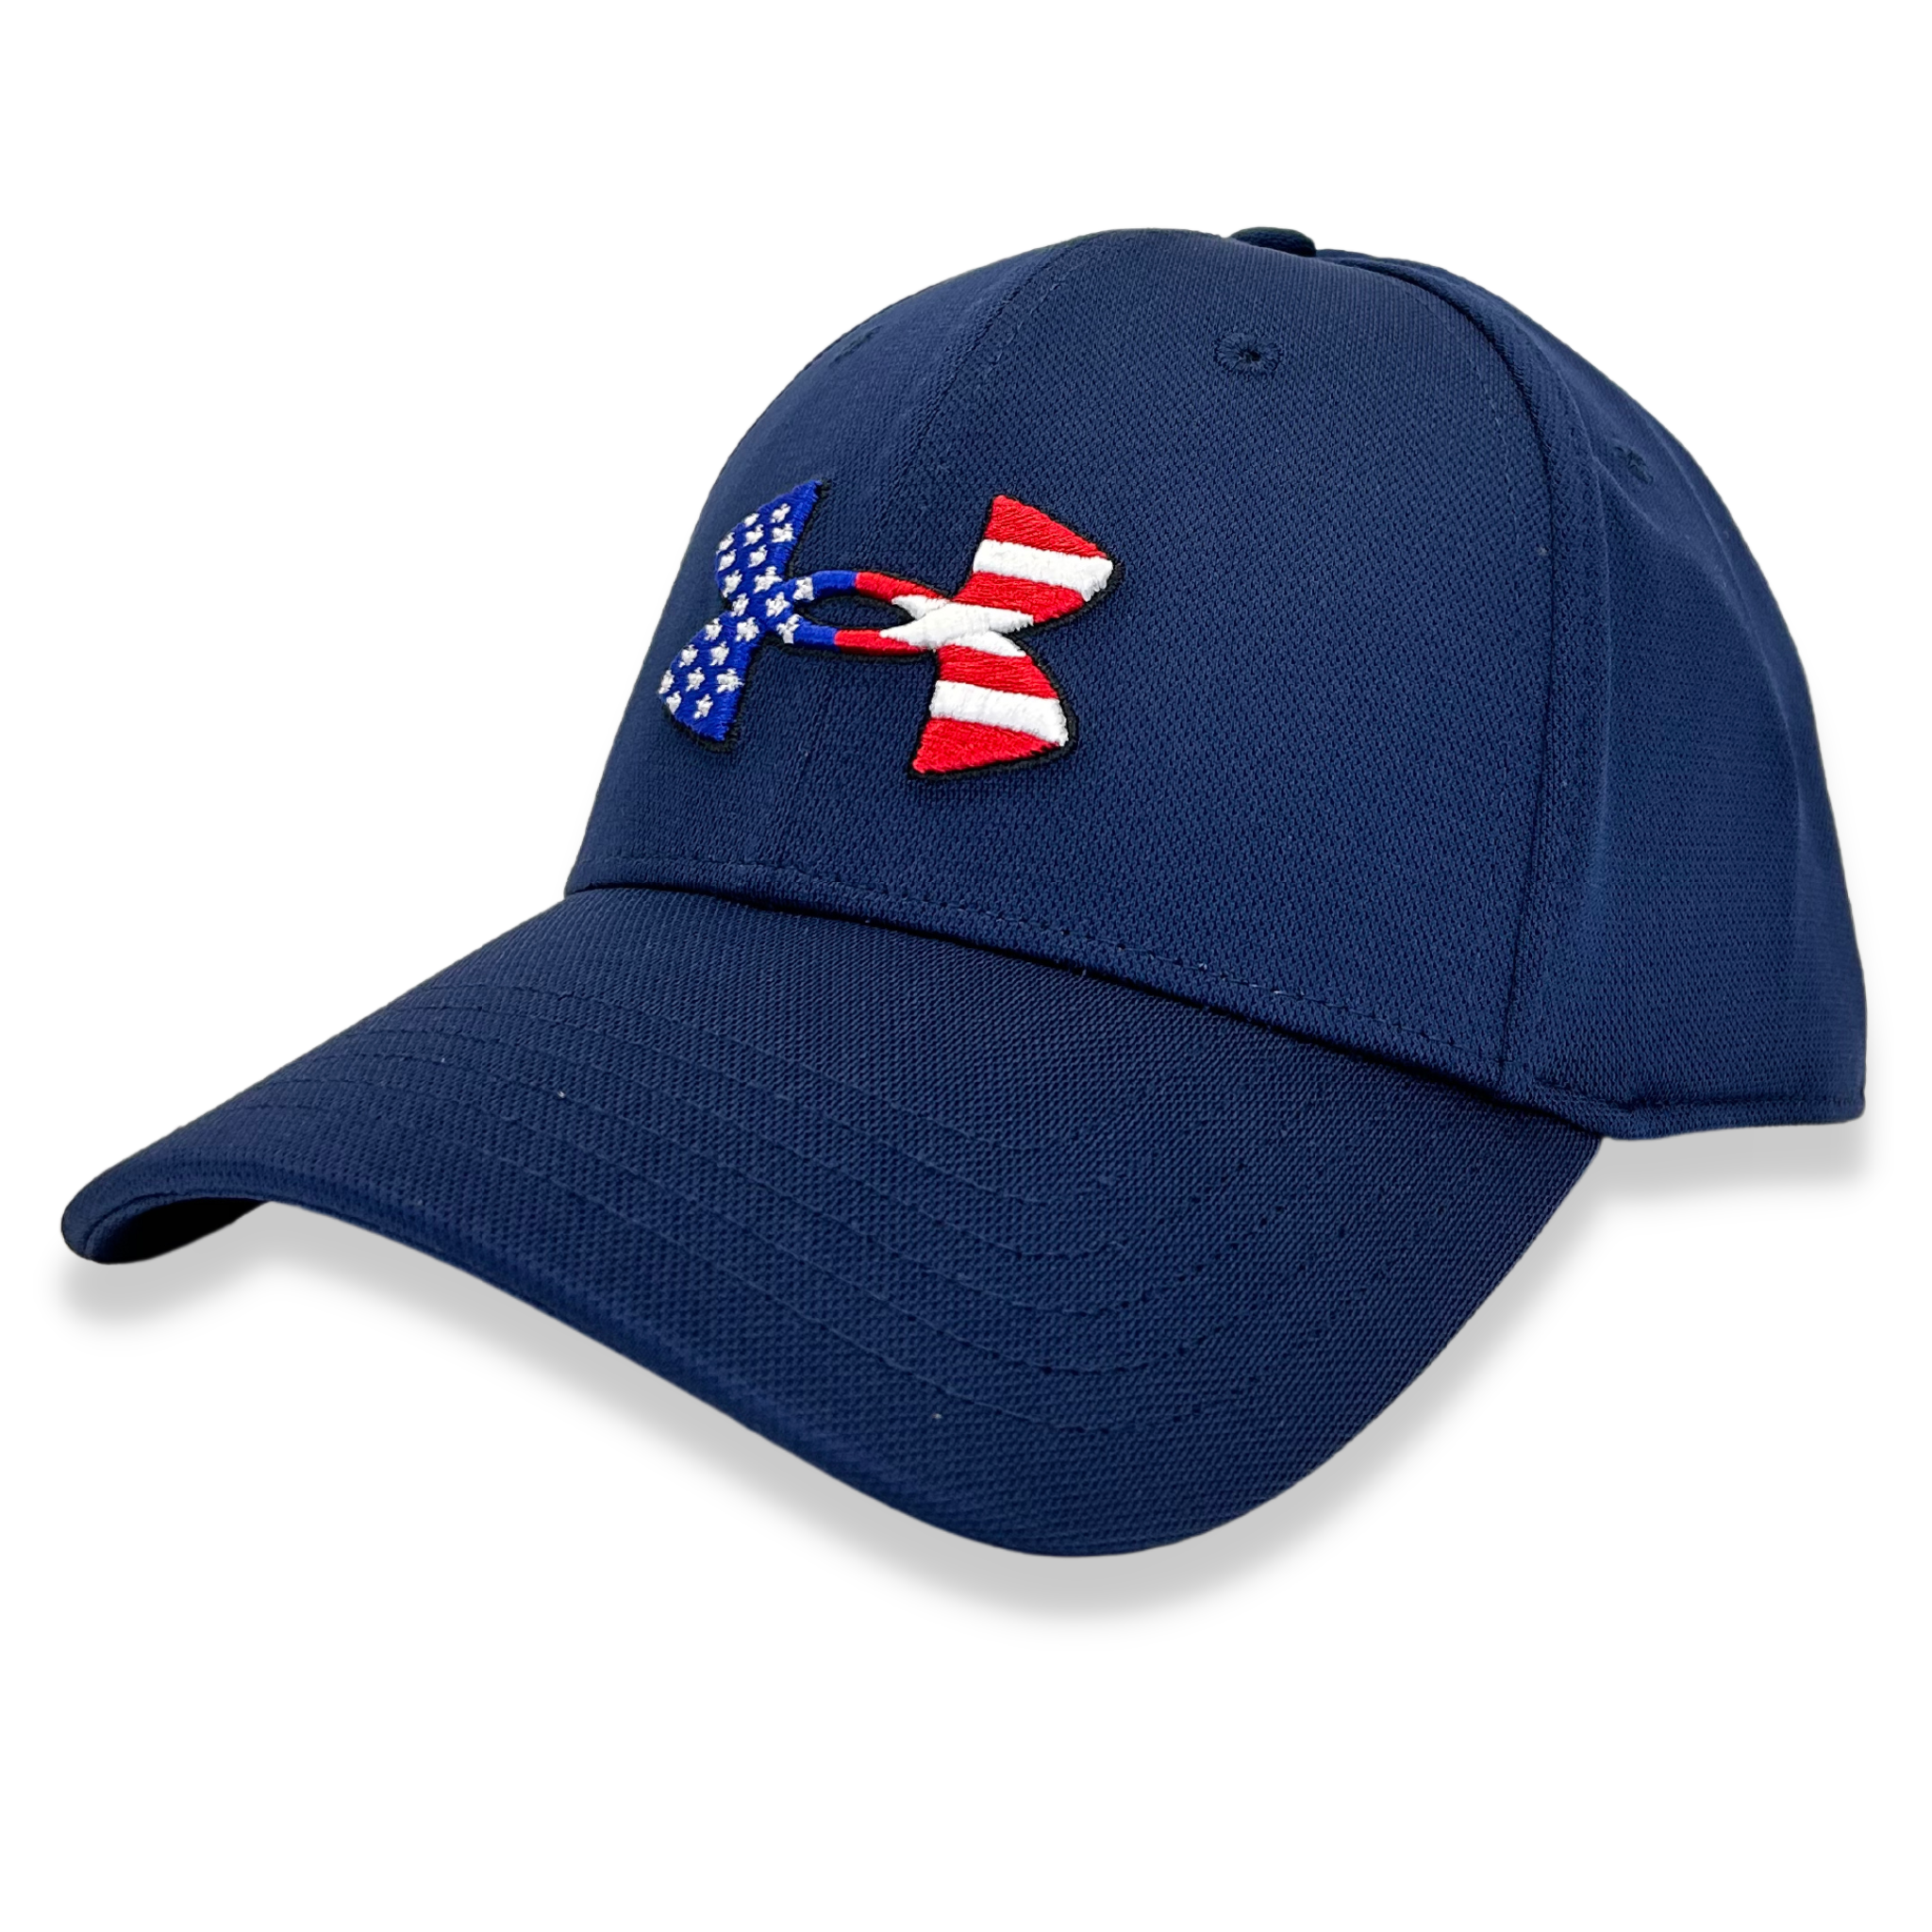 Under Armour Freedom Blitzing Hat (Navy)